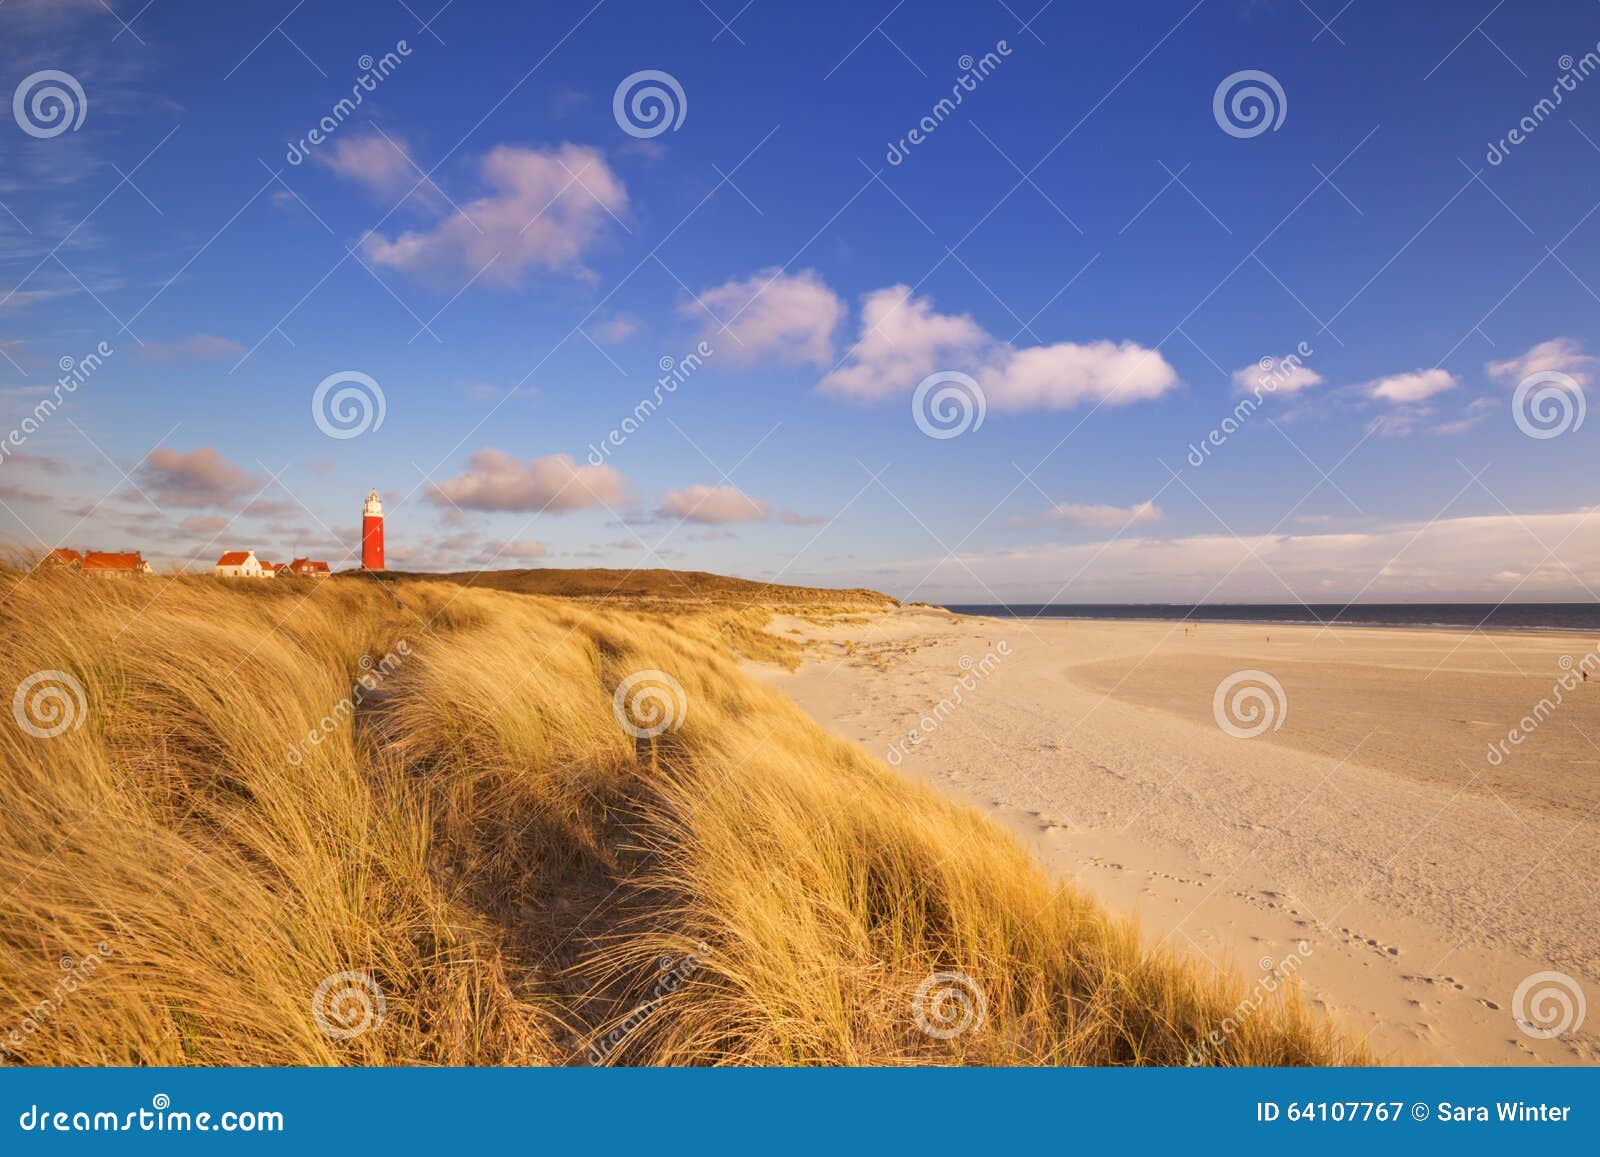 lighthouse on texel island in the netherlands